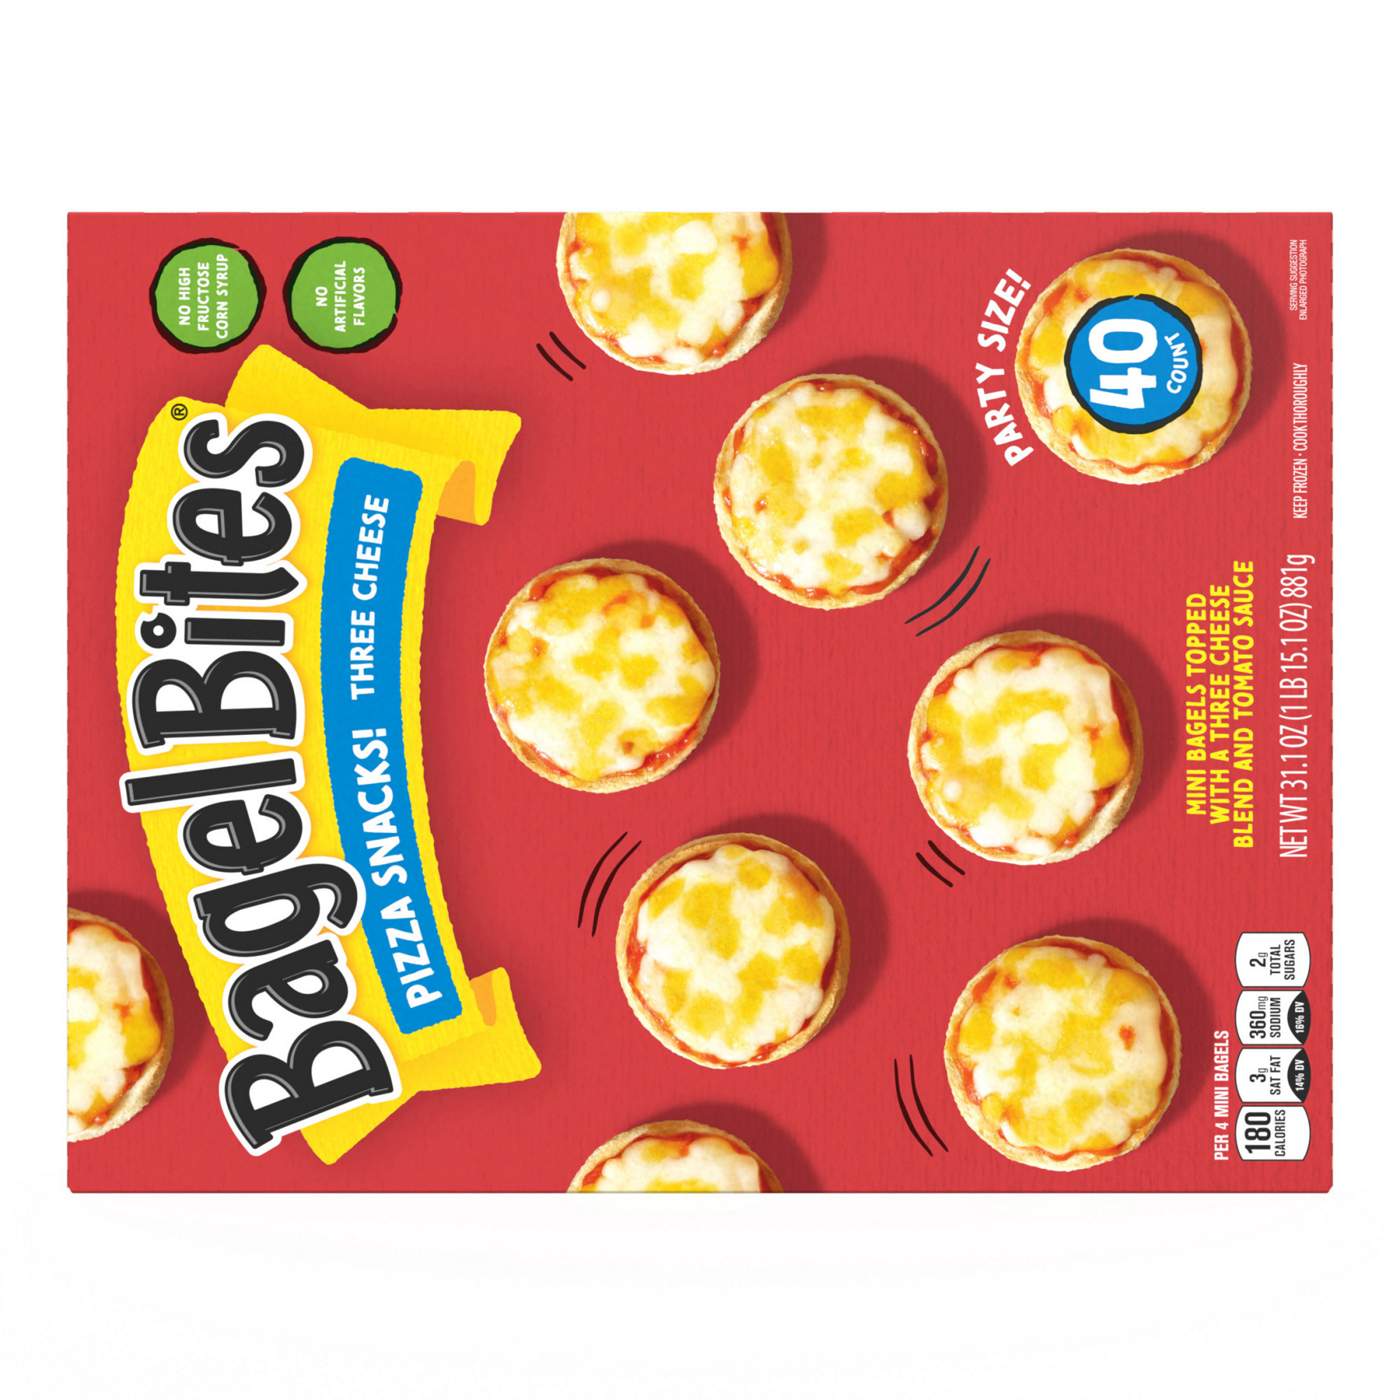 Bagel Bites Three Cheese Mini Bagels Party Size; image 6 of 9